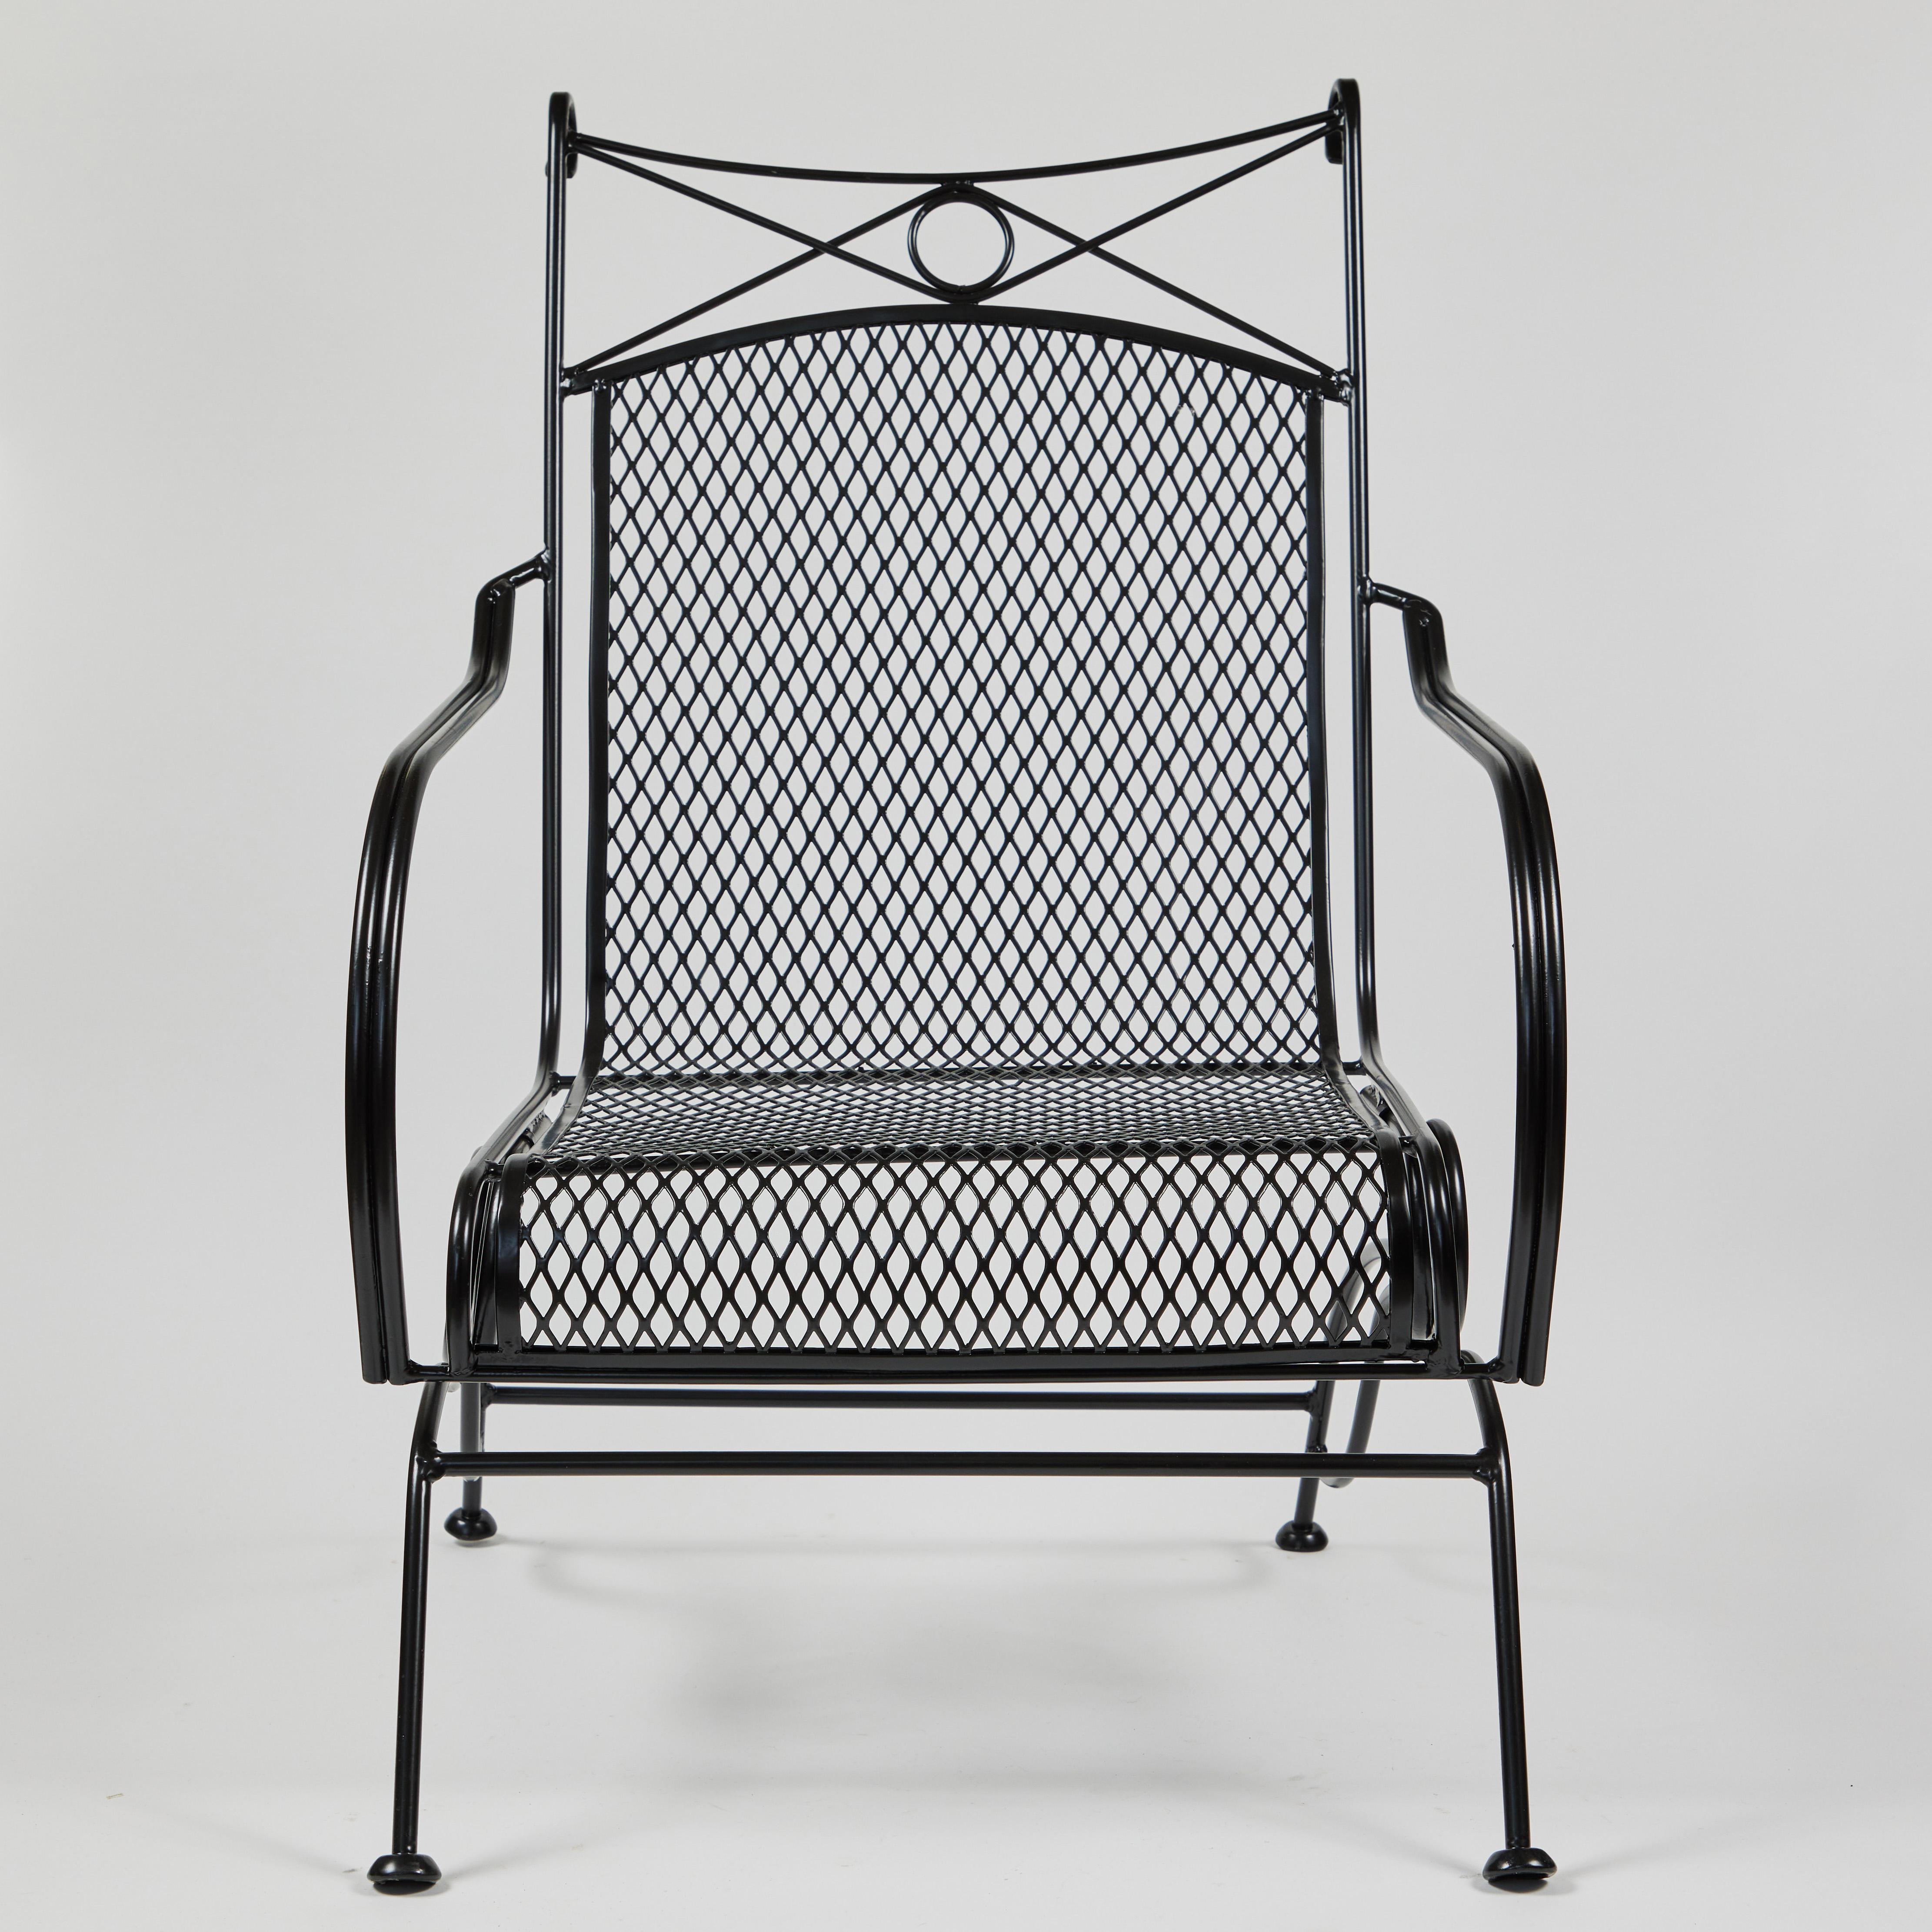 Mid century wrought iron 'Spring' chair, newly powder coated black.